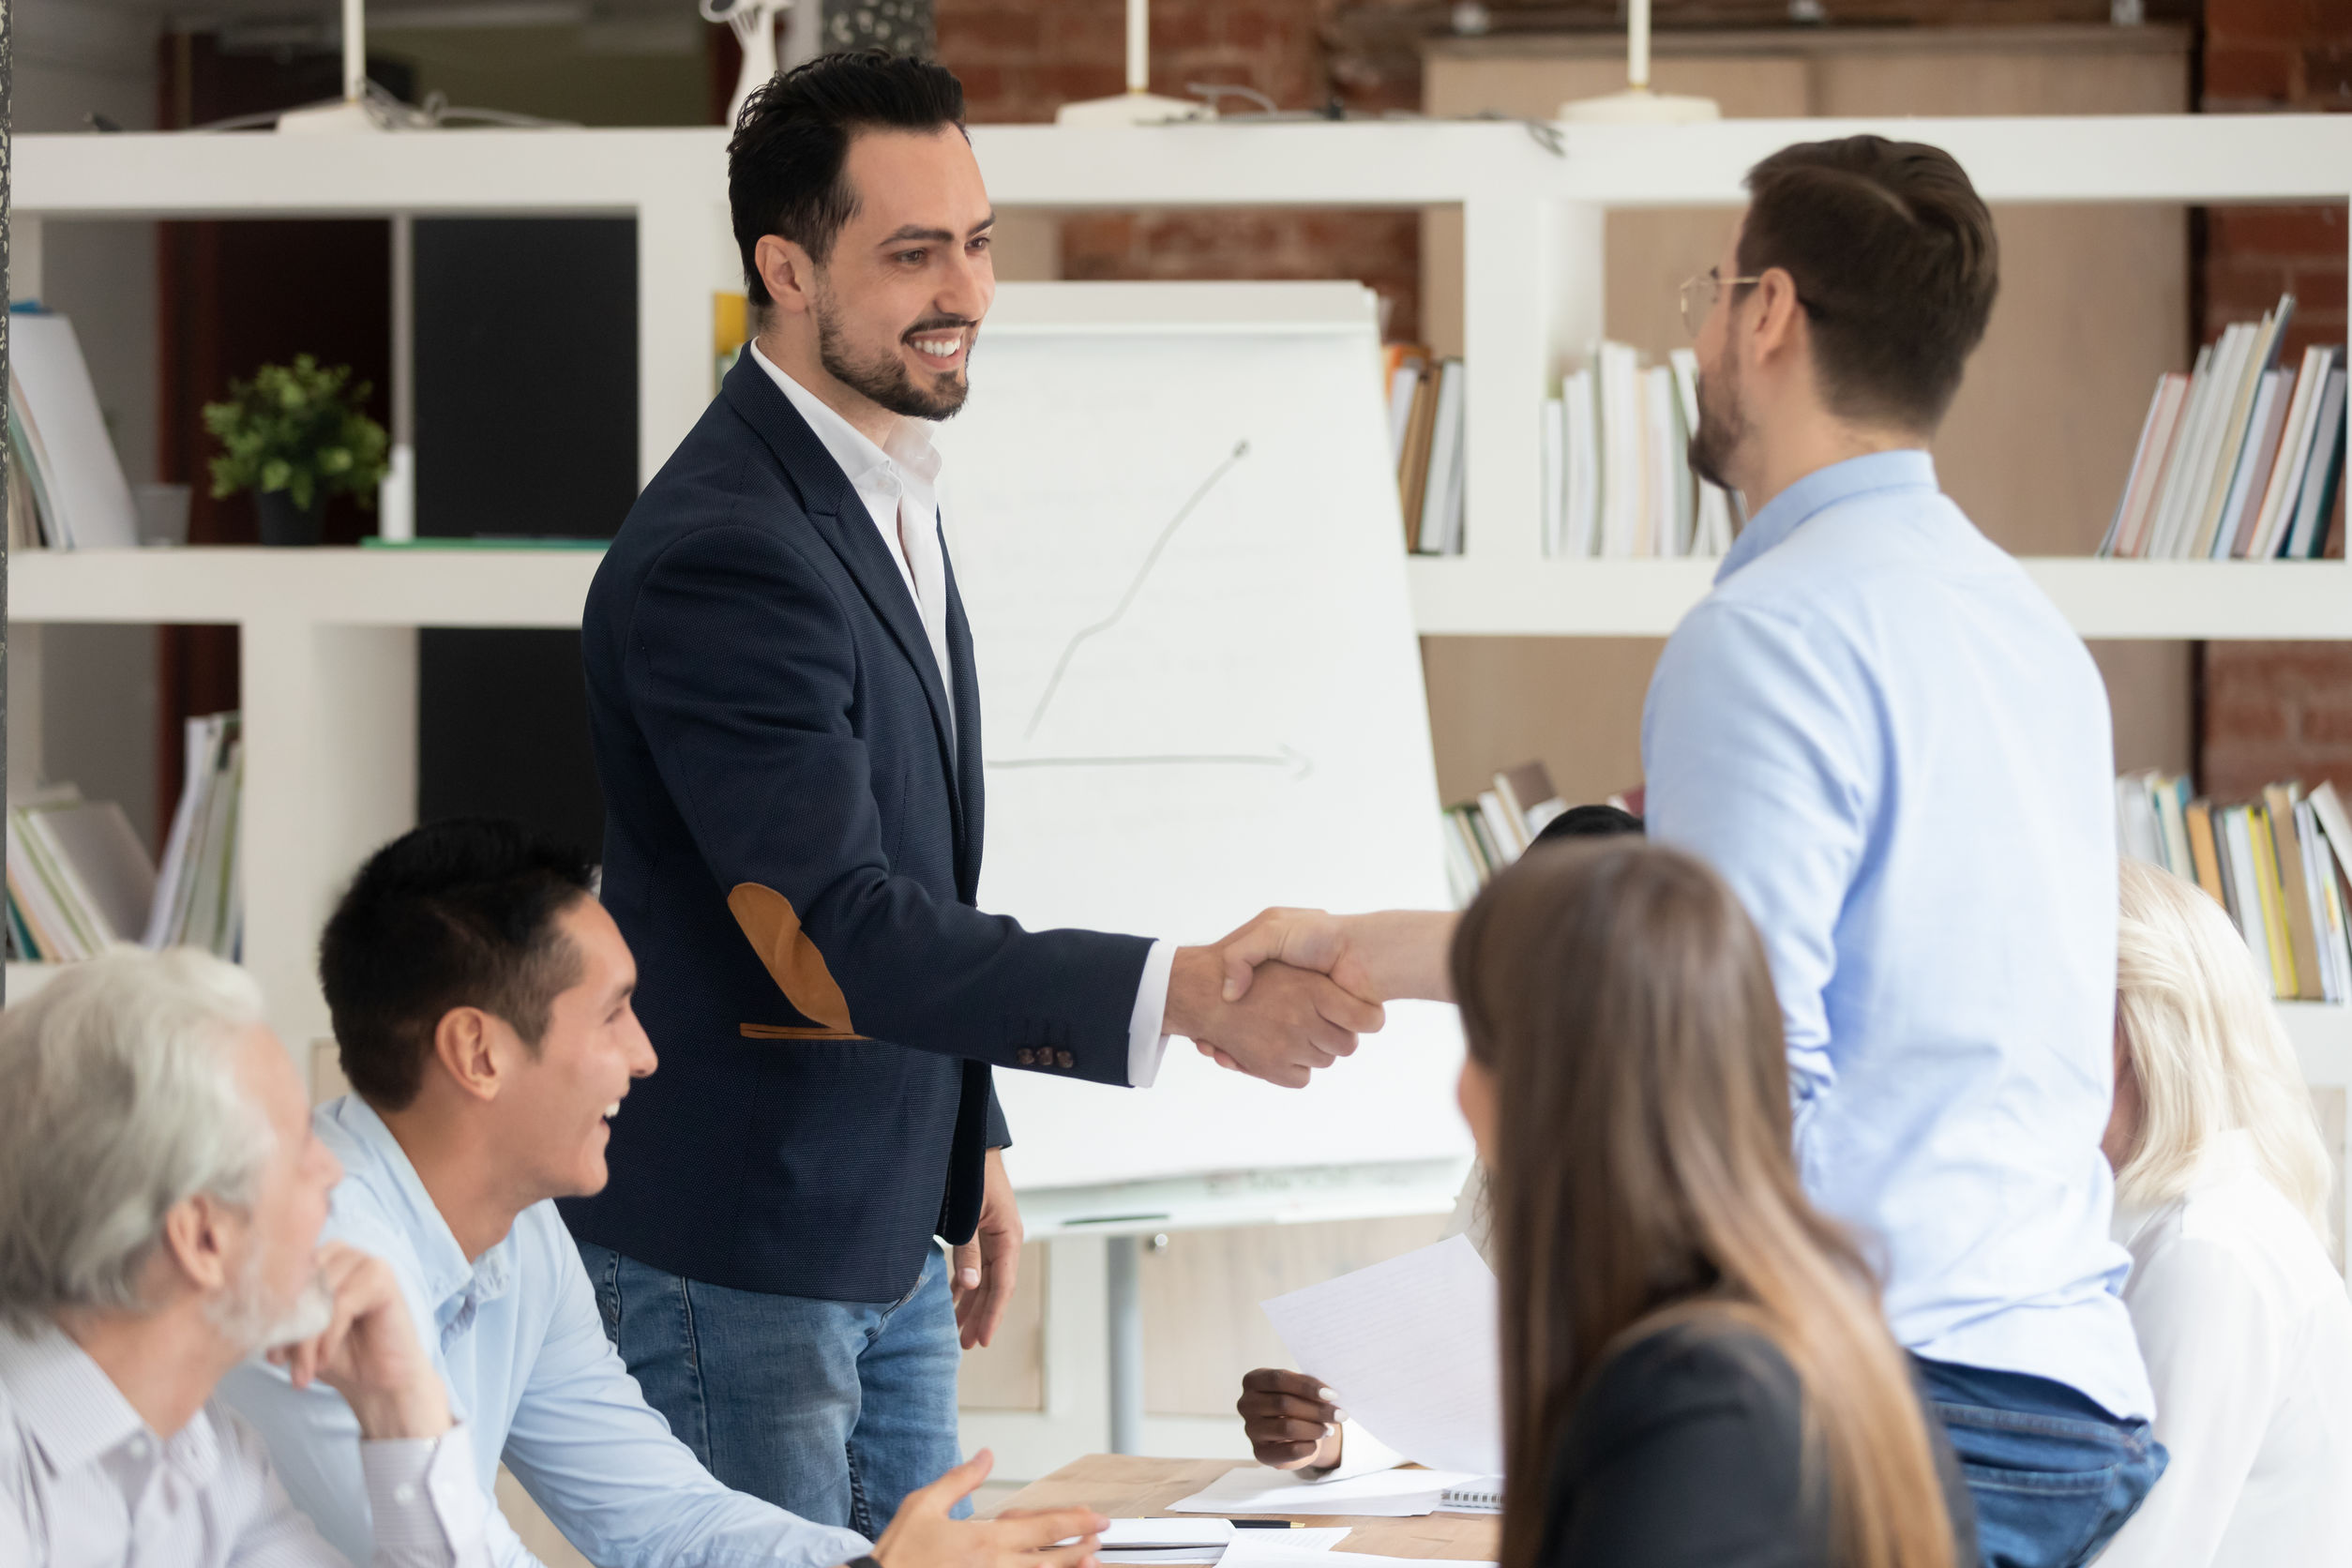 How to Start Building Employee Loyalty